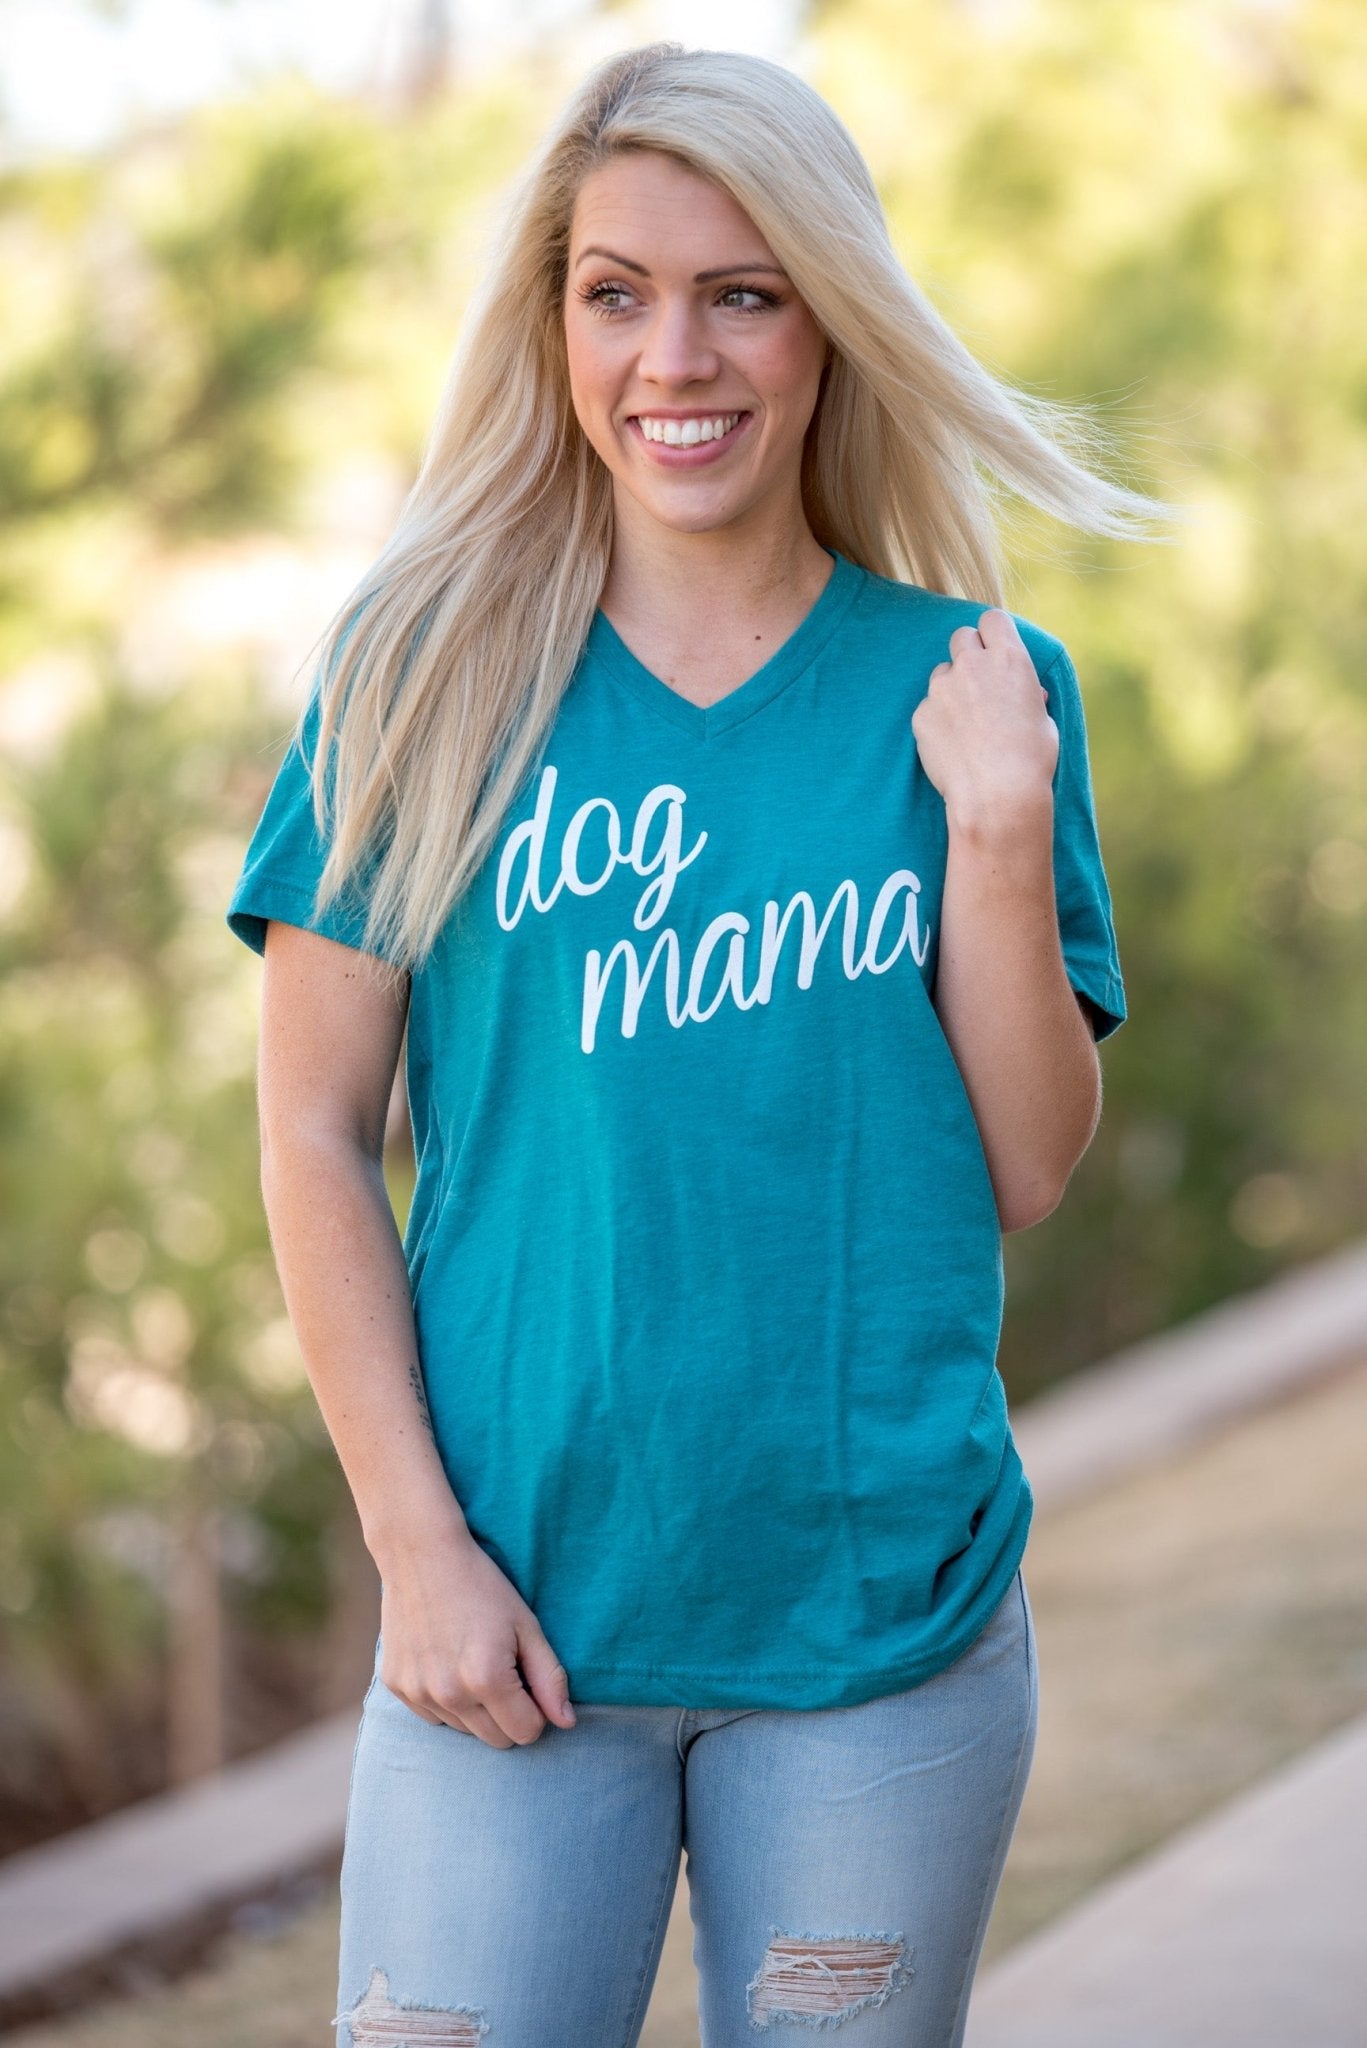 Dog mama script short sleeve v-neck t-shirt teal - Cute T-shirts - Funny T-Shirts at Lush Fashion Lounge Boutique in Oklahoma City